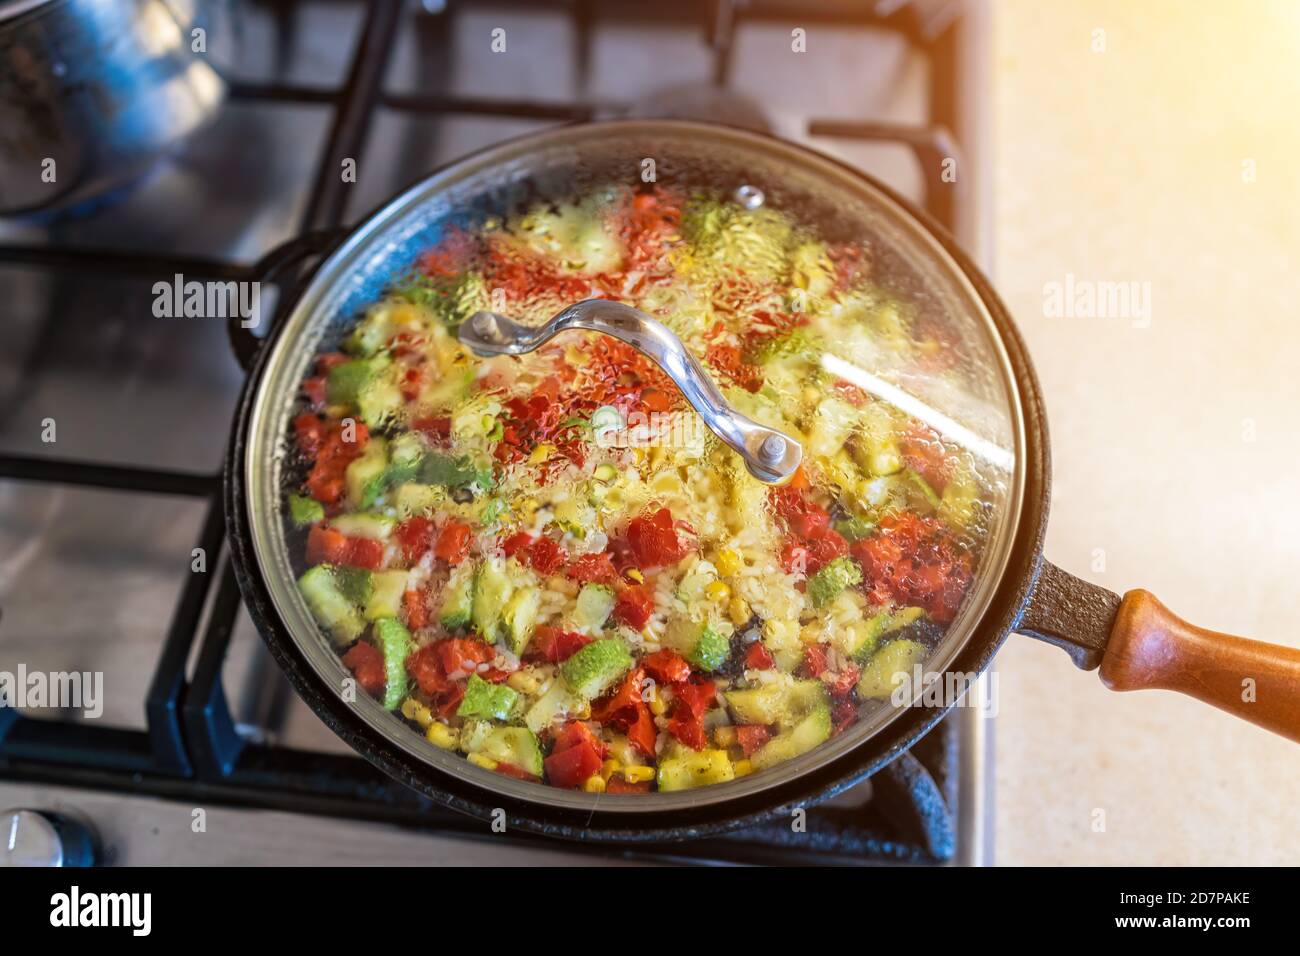 https://c8.alamy.com/comp/2D7PAKE/a-big-pilaf-pan-bowl-with-mix-of-vegetables-cooking-on-the-kitchen-rice-with-red-beans-and-vegetables-in-a-frying-pan-2D7PAKE.jpg